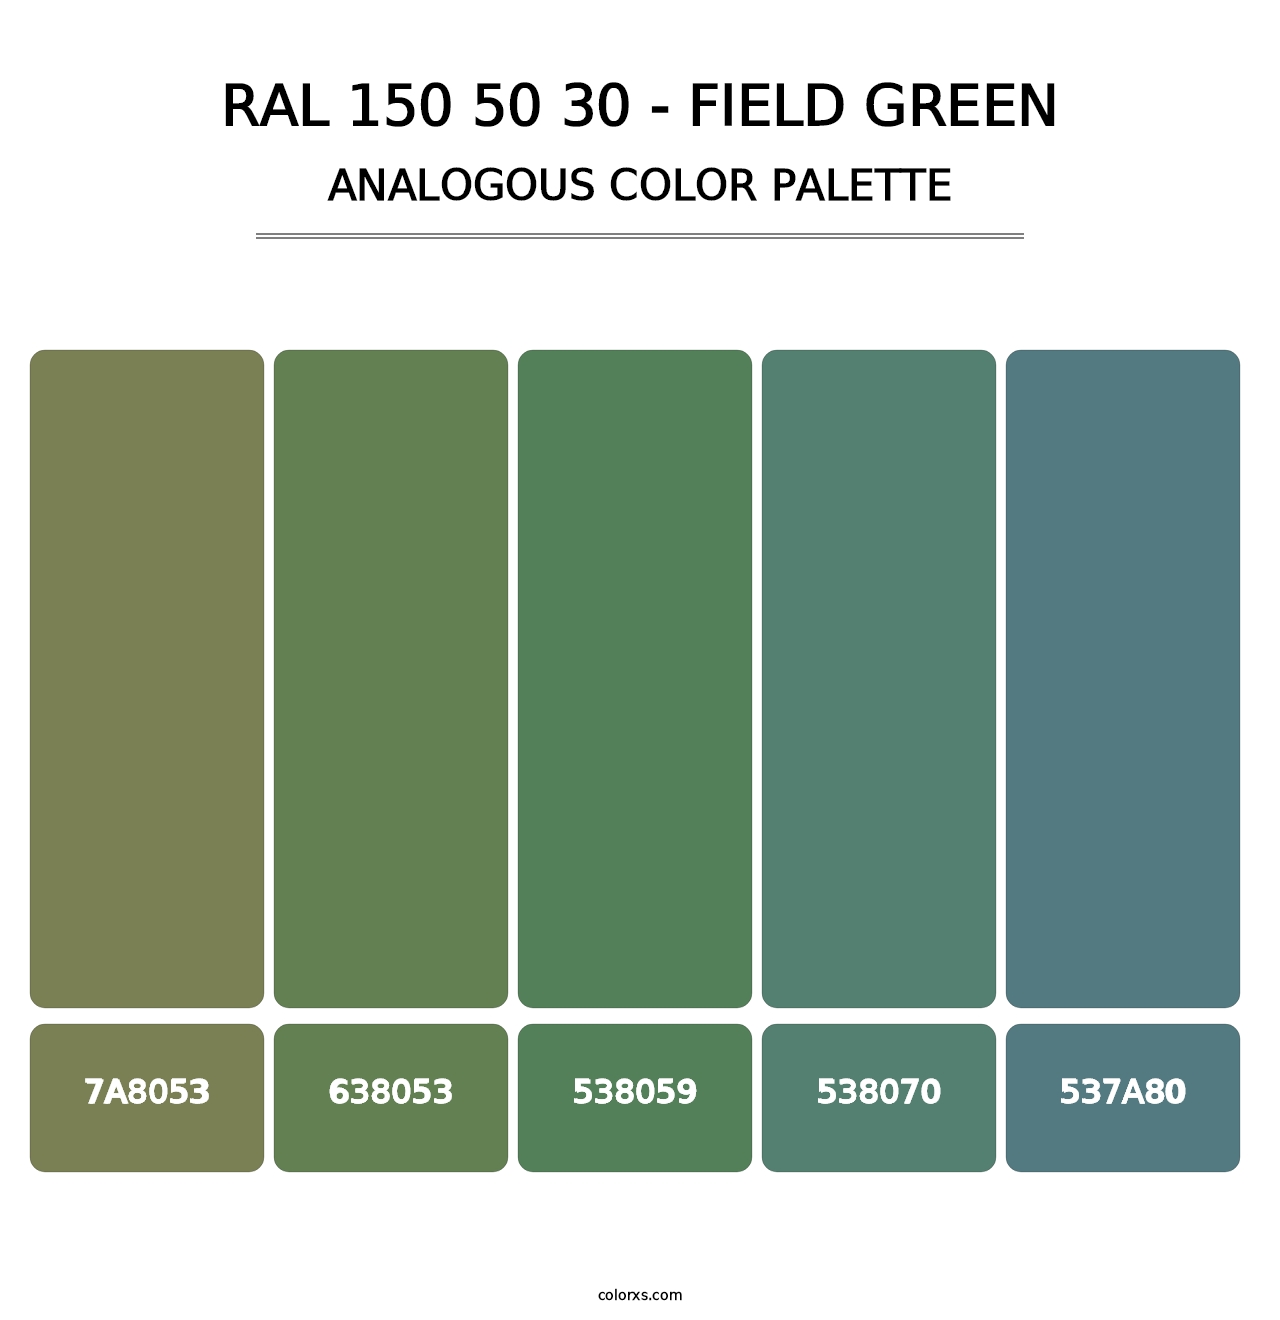 RAL 150 50 30 - Field Green - Analogous Color Palette